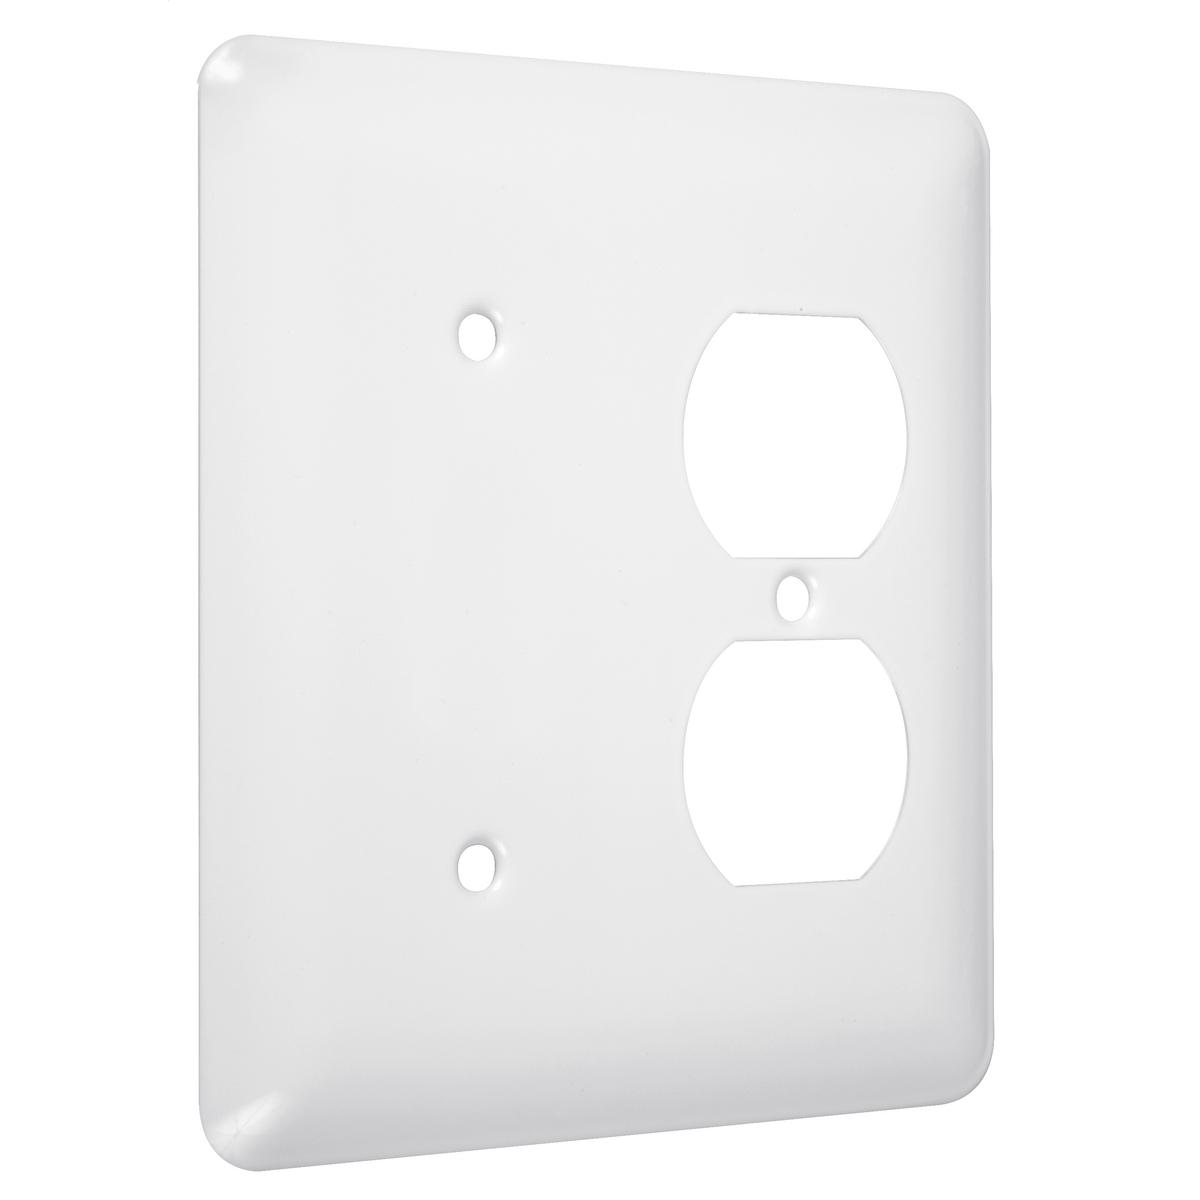 Hubbell WRW-DB 2-Gang Metal Wallplate, Maxi, Duplex/Blank, White Smooth  ; Easily primed and painted to match or complement walls. ; Won't bow, crack or distort during installation. ; Premium North American powder coat. ; Includes screw(s) in matching finish.